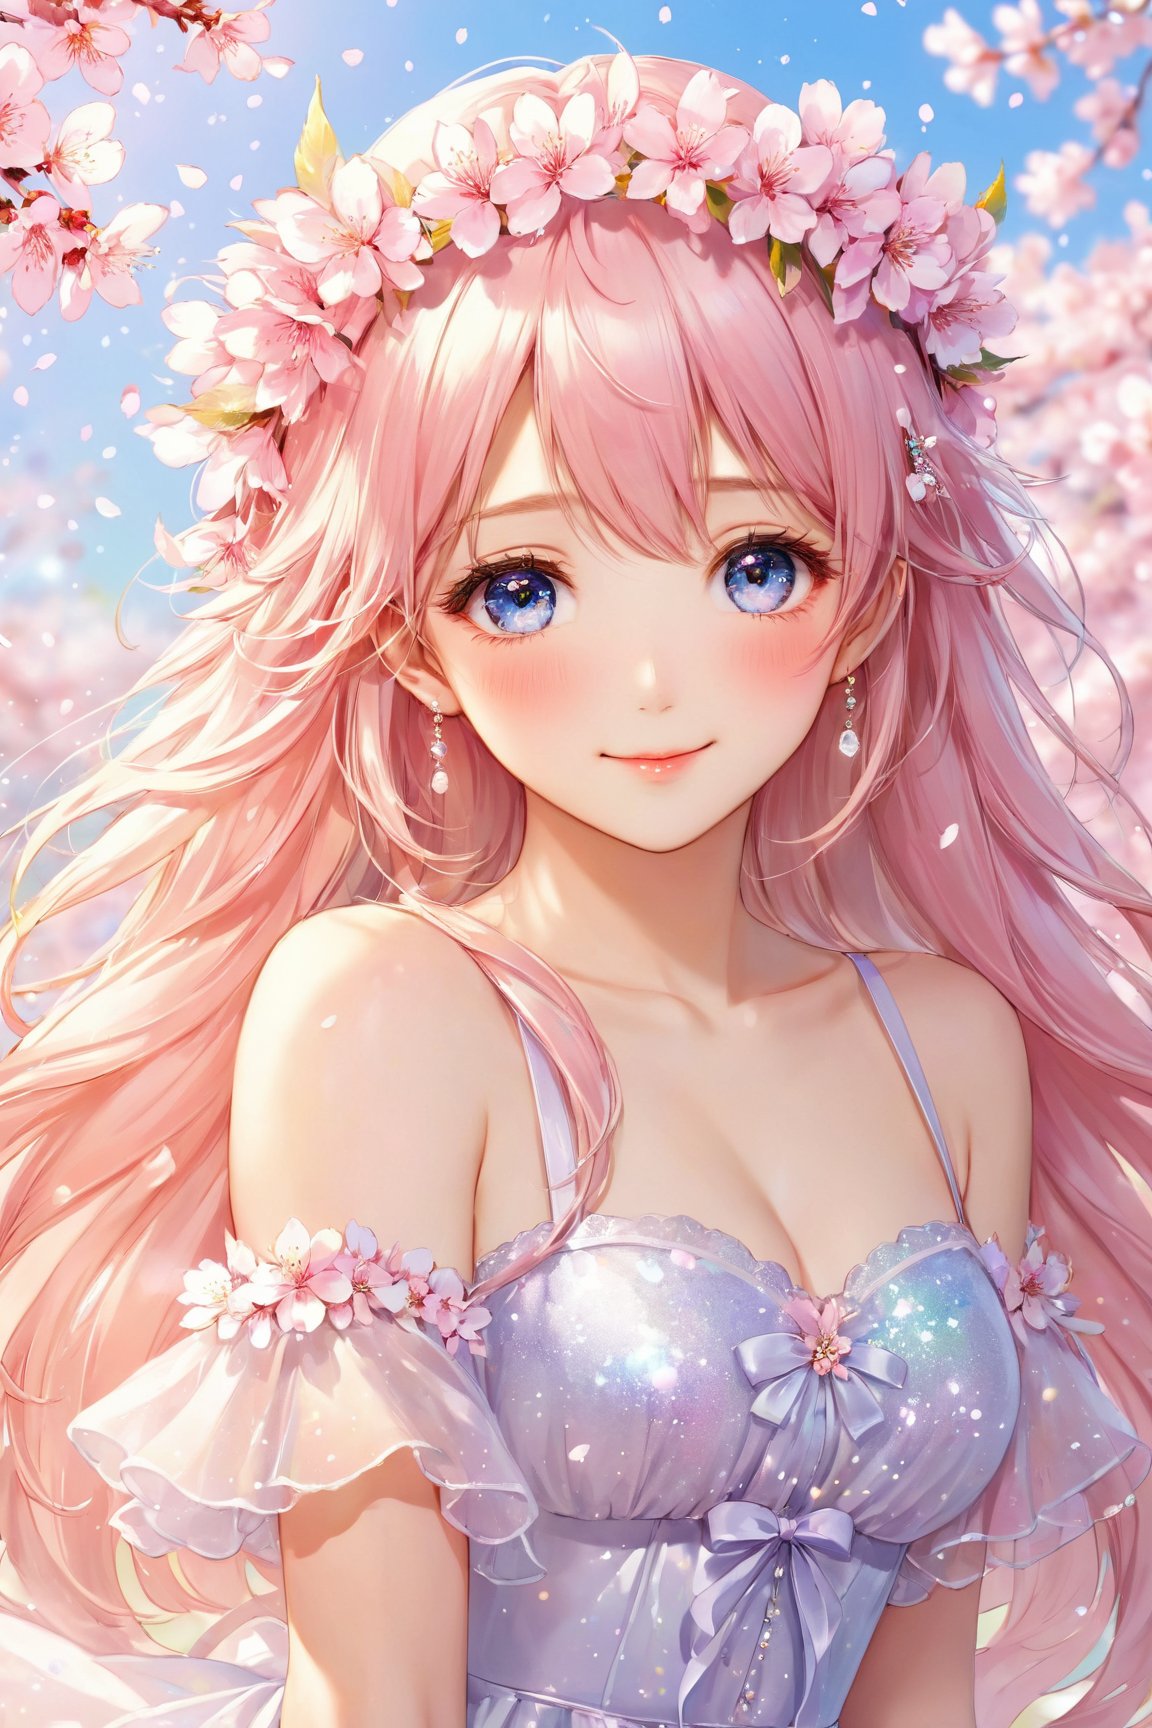 (highres,realistic) Anime,girl,detailed eyes,detailed lips,long hair,flower crown,soft expression,vibrant colors,cherry blossom background,fantasy,sparkles,shoujo manga style,sparkling eyes,pastel colors,gentle smile,peaceful atmosphere,light breeze,thin waist,alpha gradient,blushing,flowy dress,sparkling jewelry,natural lighting,petals falling,beautiful surroundings,utterly sublime,serene setting,waist-length hair,adorable,innocent,ethereal,delicate hands,pink blush,sparking eyes,joyful,tranquil,blissful